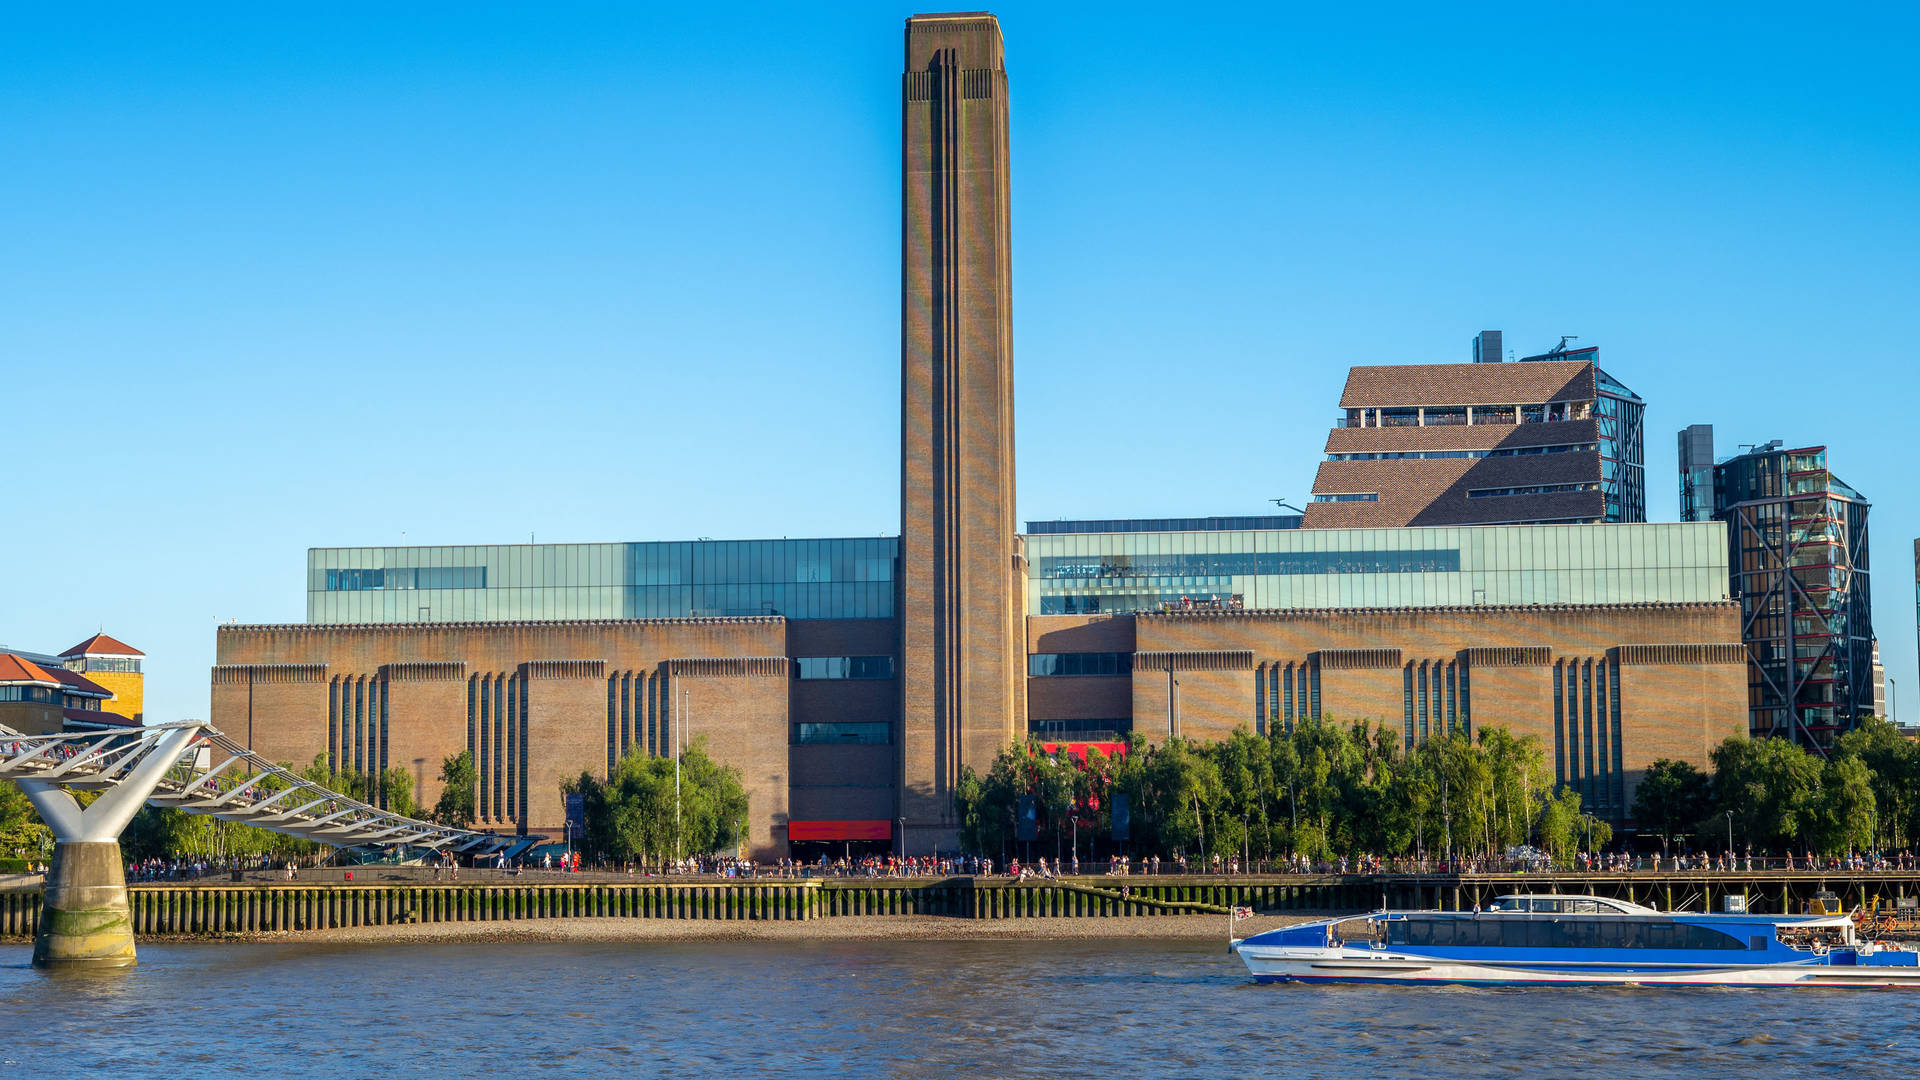 Tate Modern on south bank of London's Thames